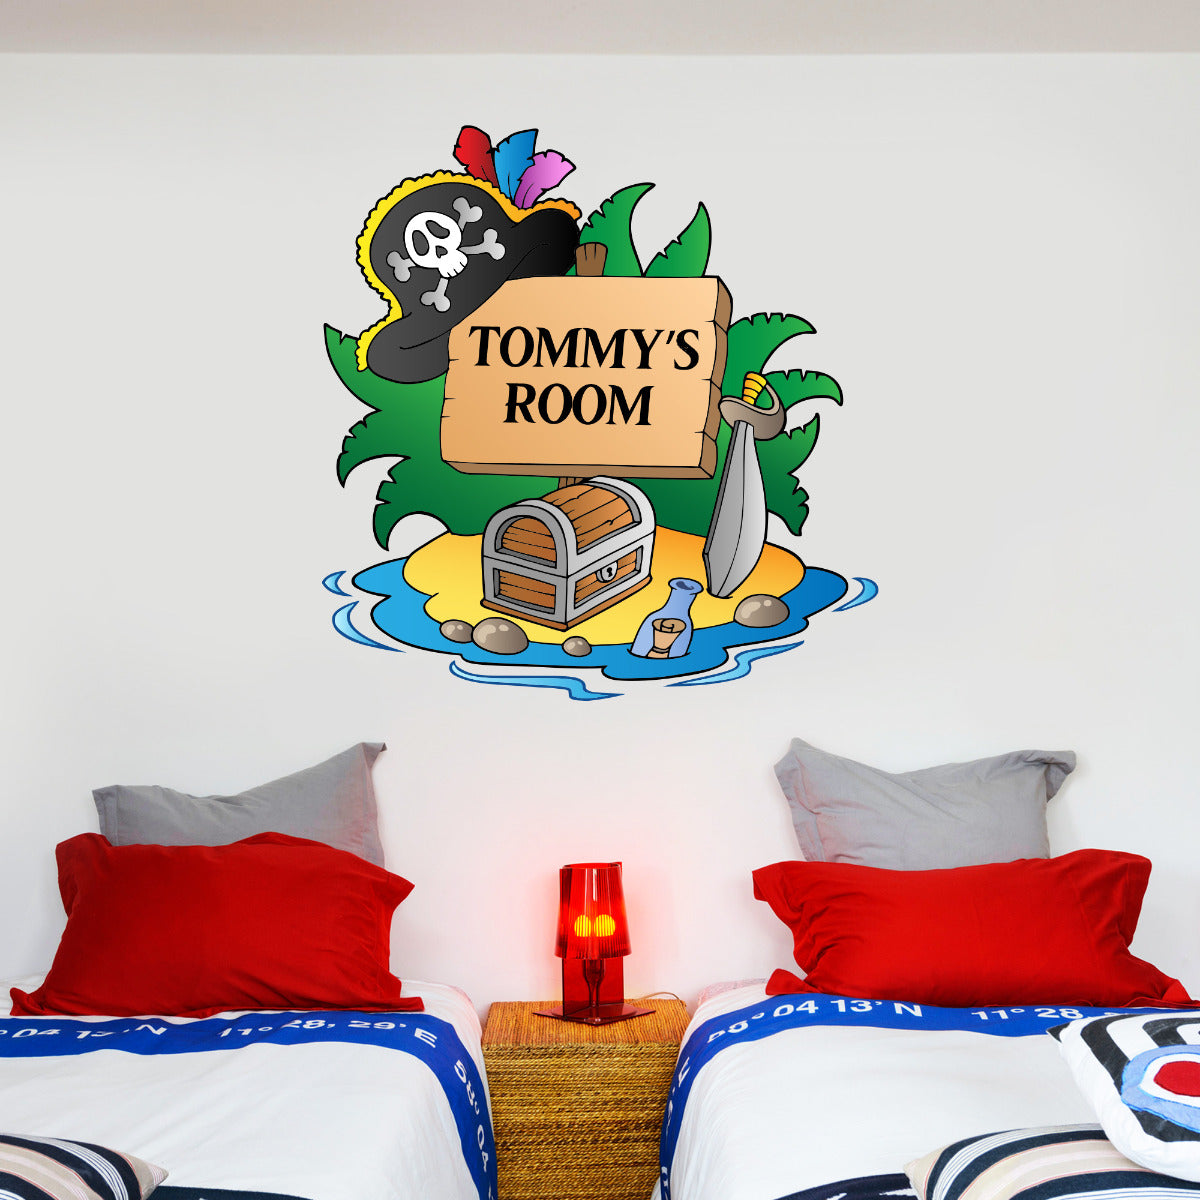 Pirate Wall Sticker Personalised Name Island Sign